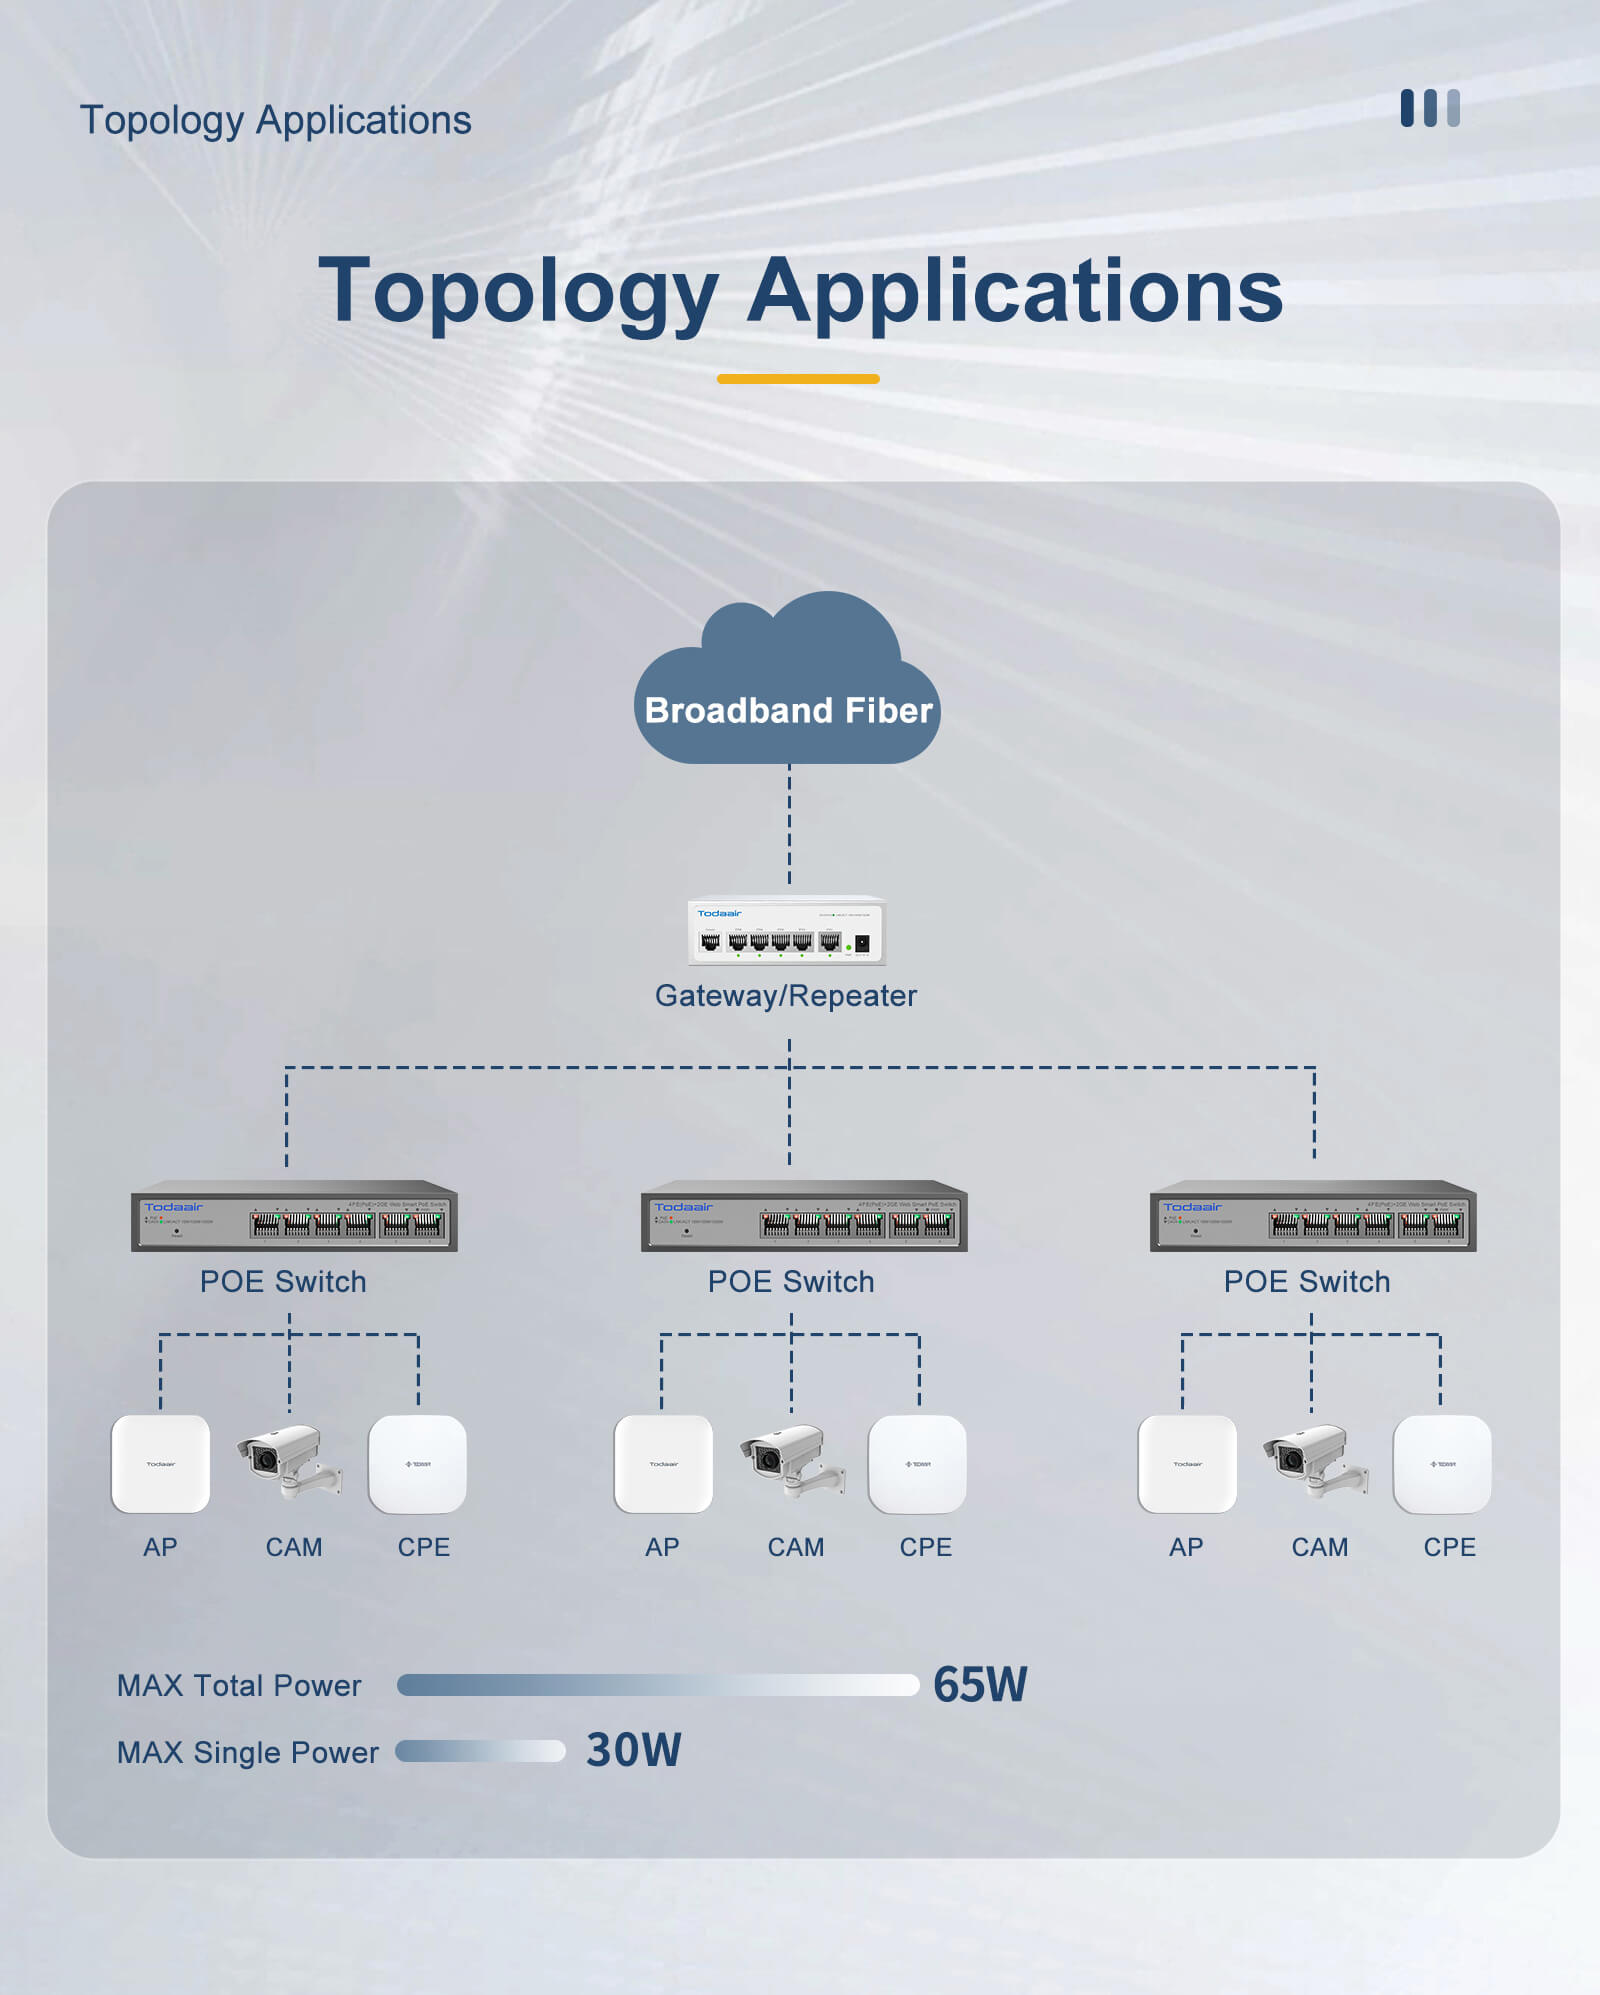 POE Network switch topology applications